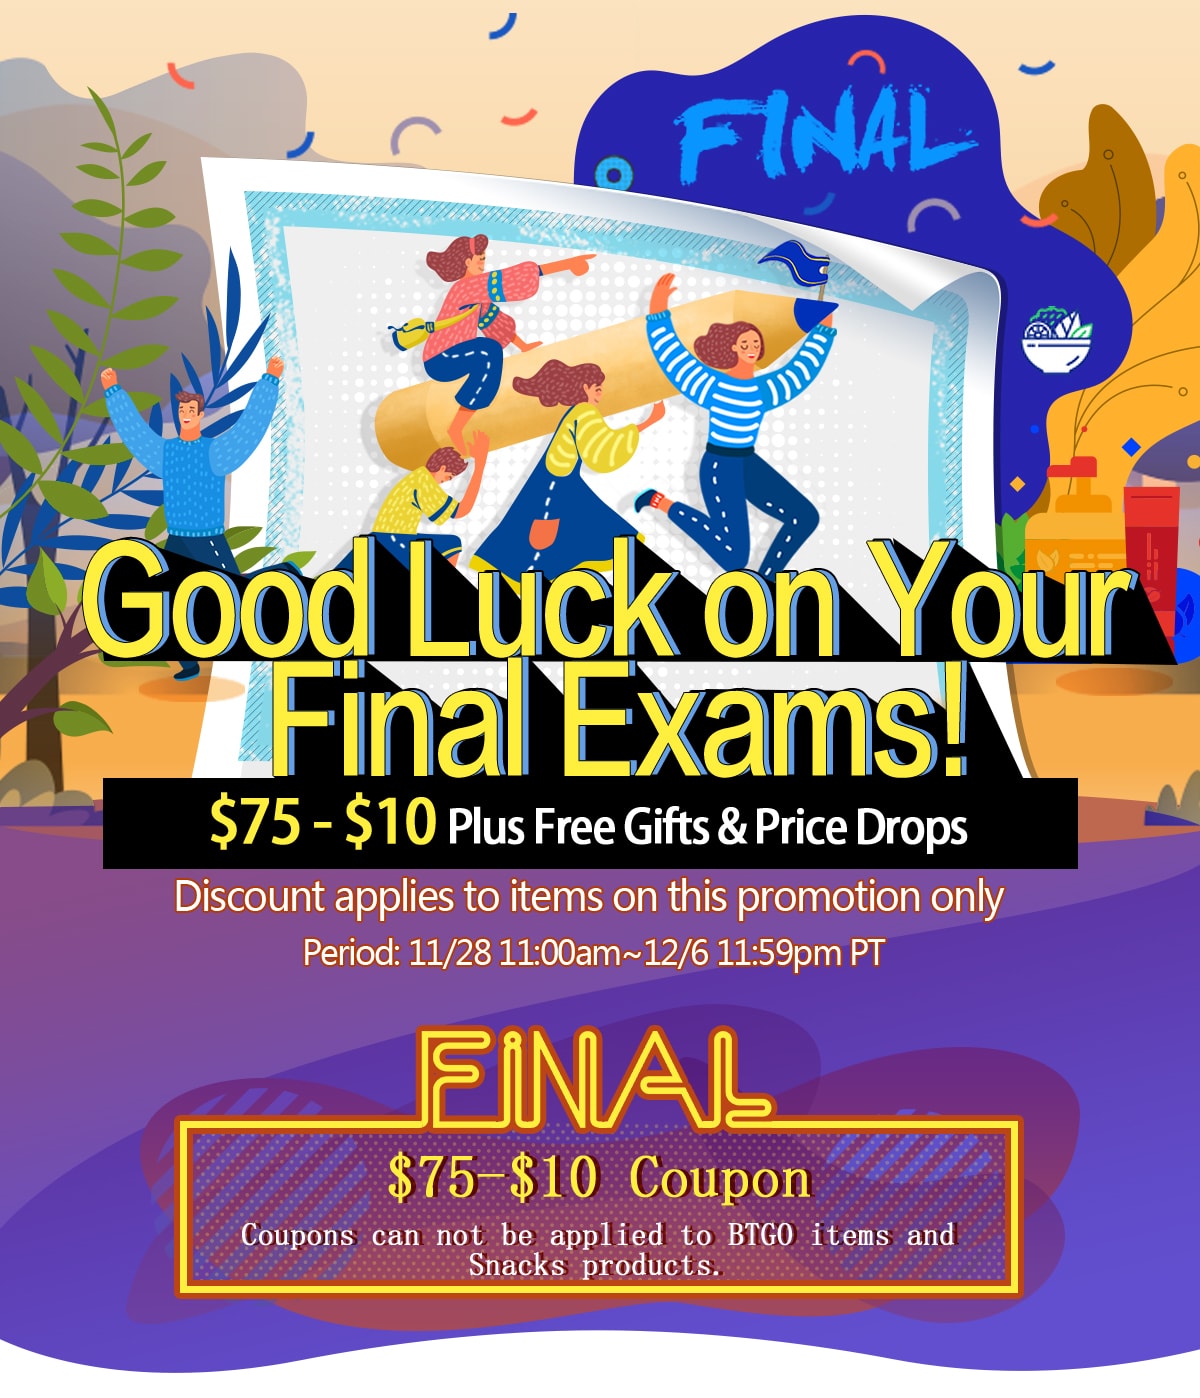 Good Luck on Your Final Exams!